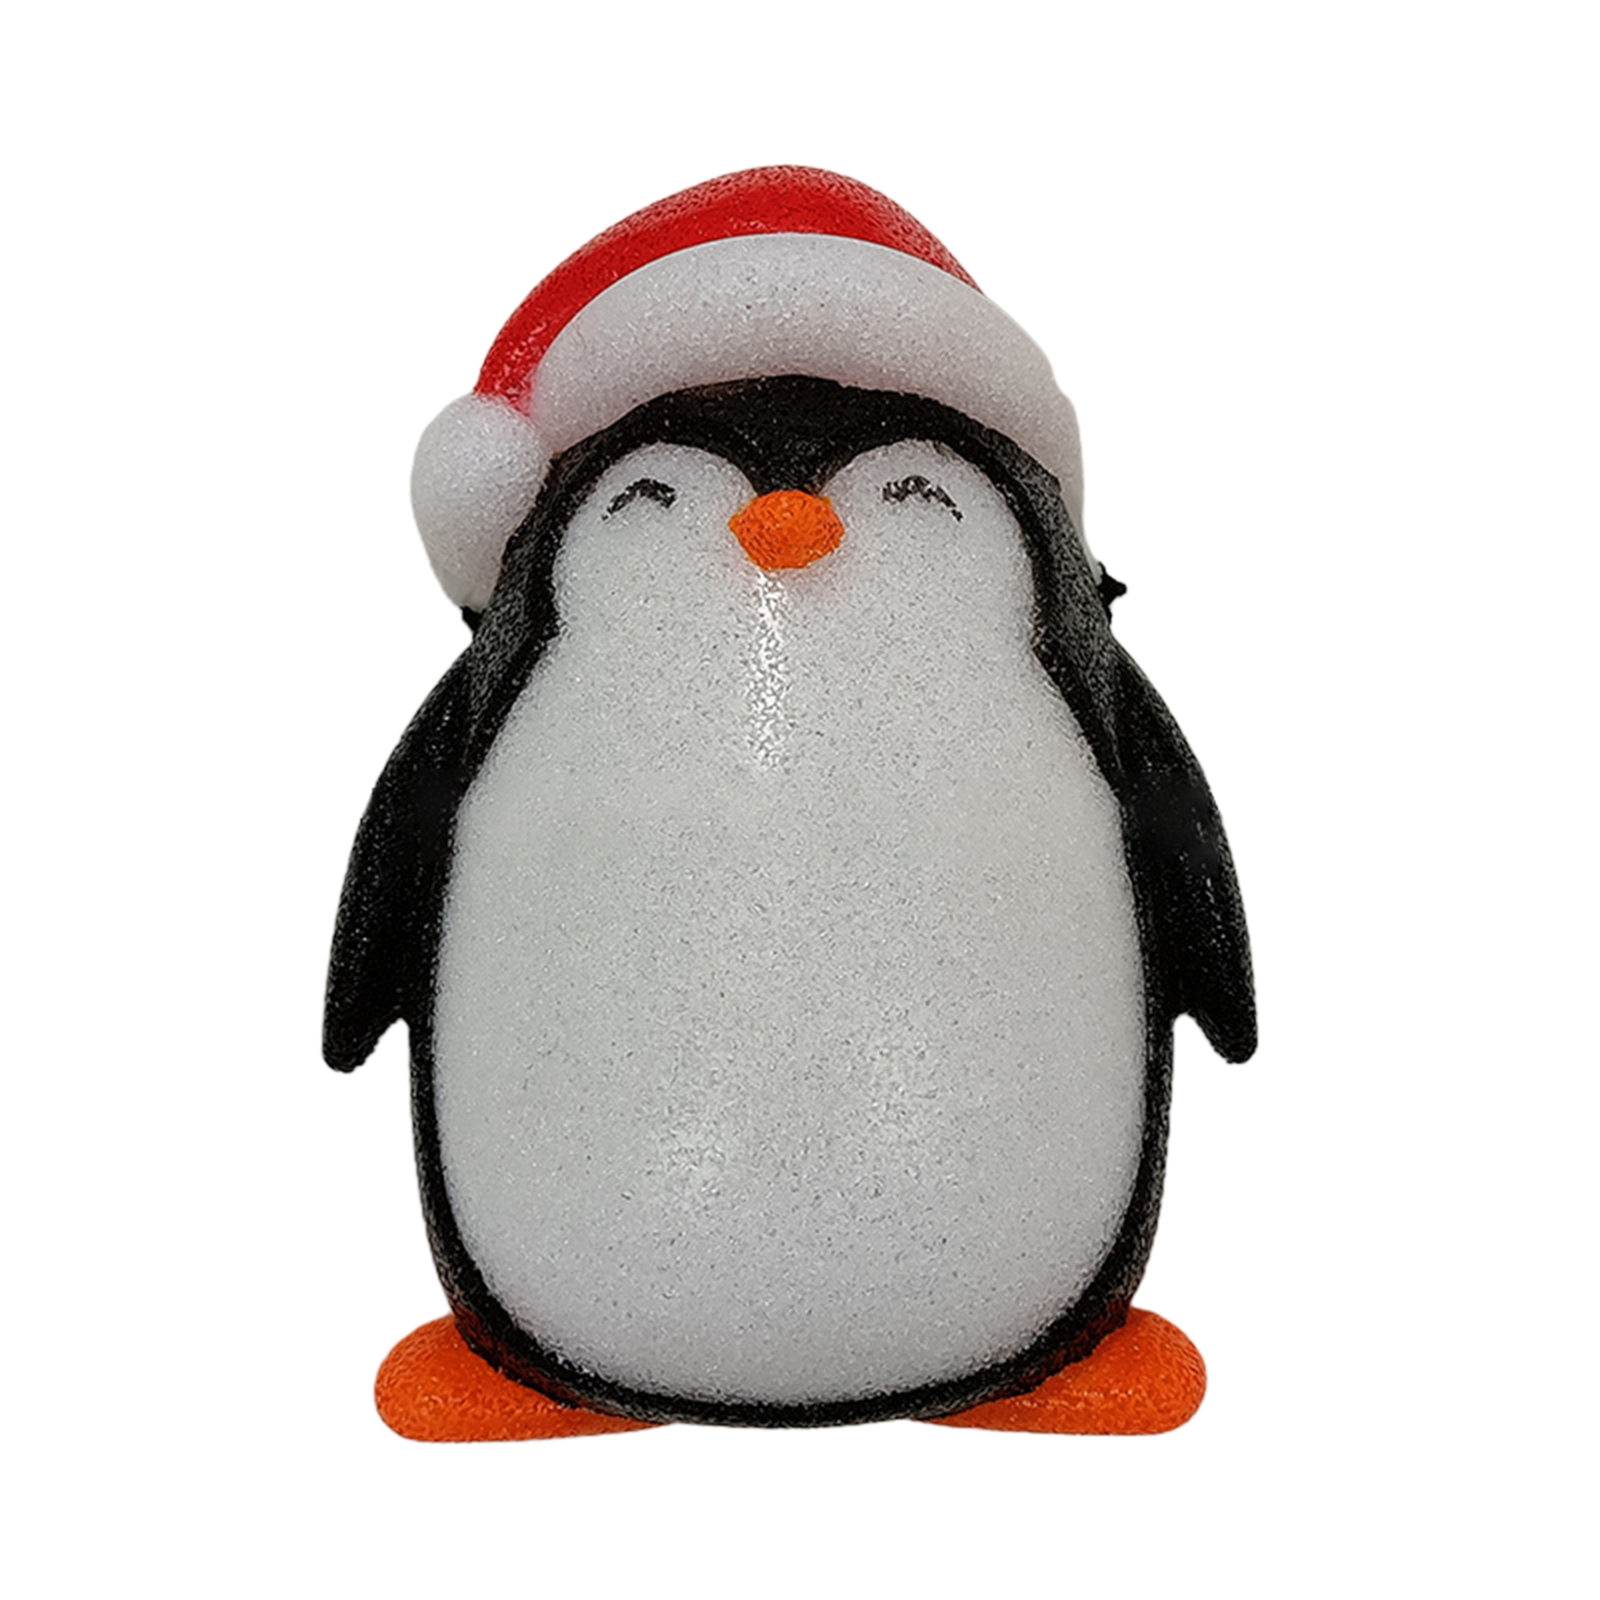 Christmas Snowman Light Cover Waterproof Energy Saving Sturdy Structure Easy Installation Outdoor Porch Lamp Christmas Gift Penguin (30 x 22 x 9CM)